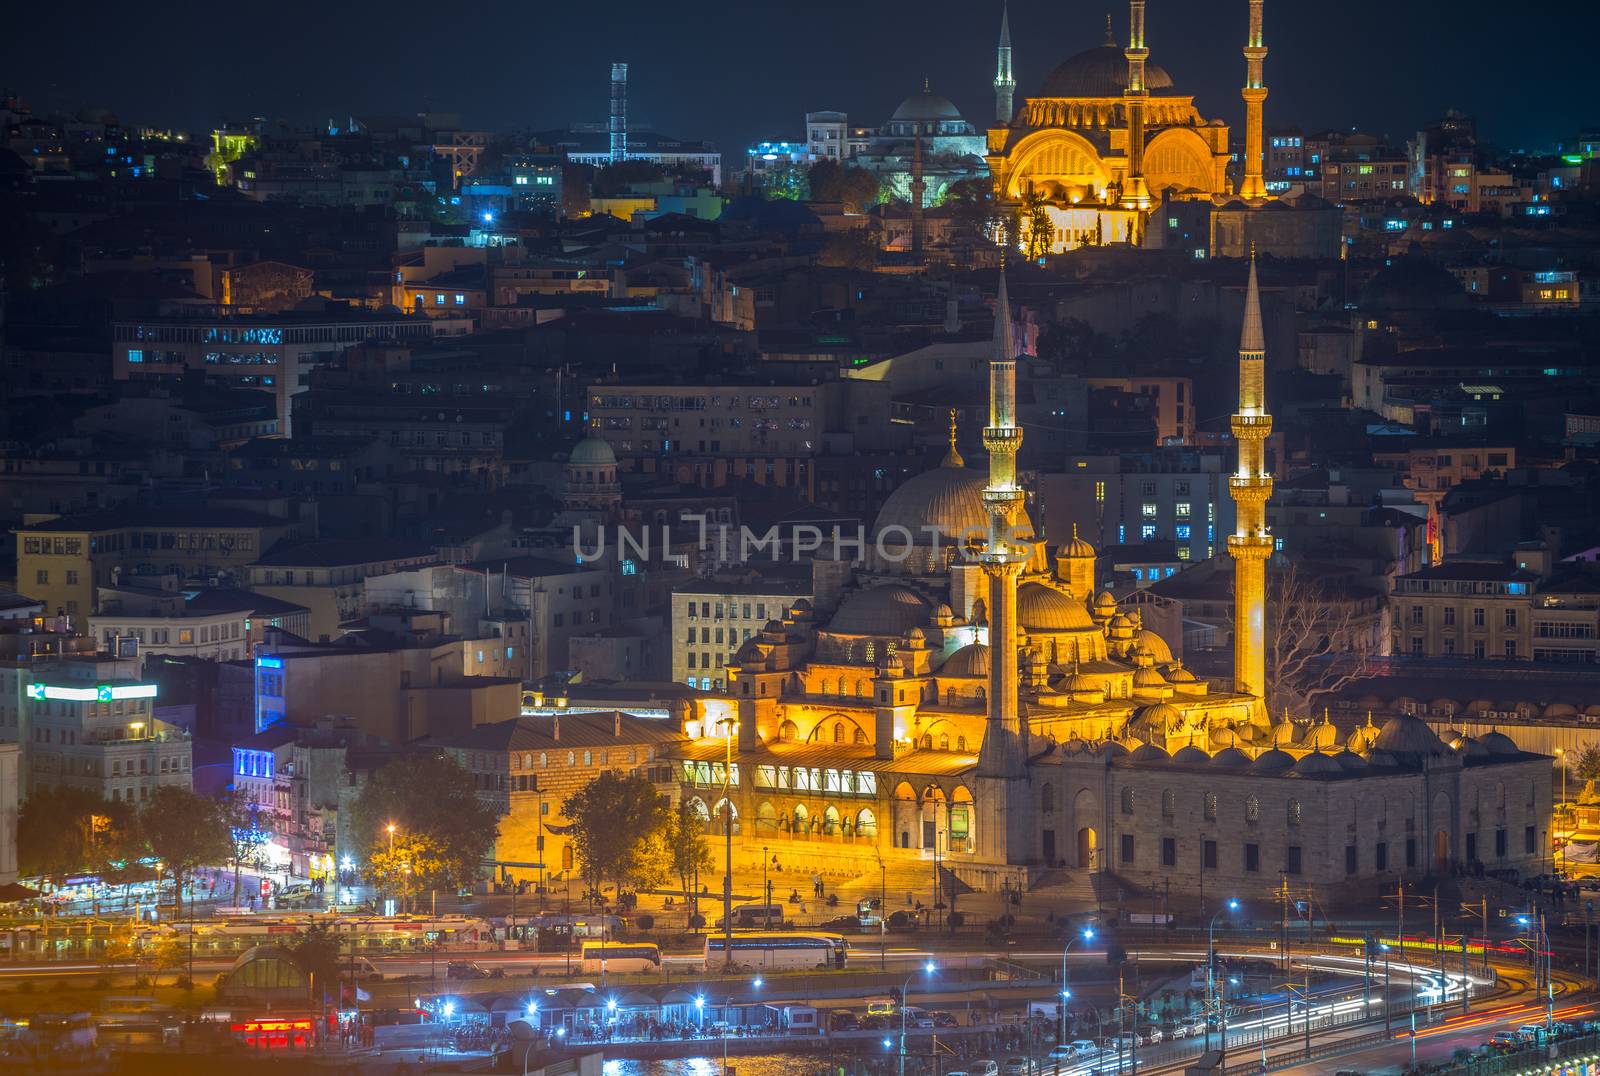 Yeni Cami, New Mosque. Istanbul night aerial view by jovannig